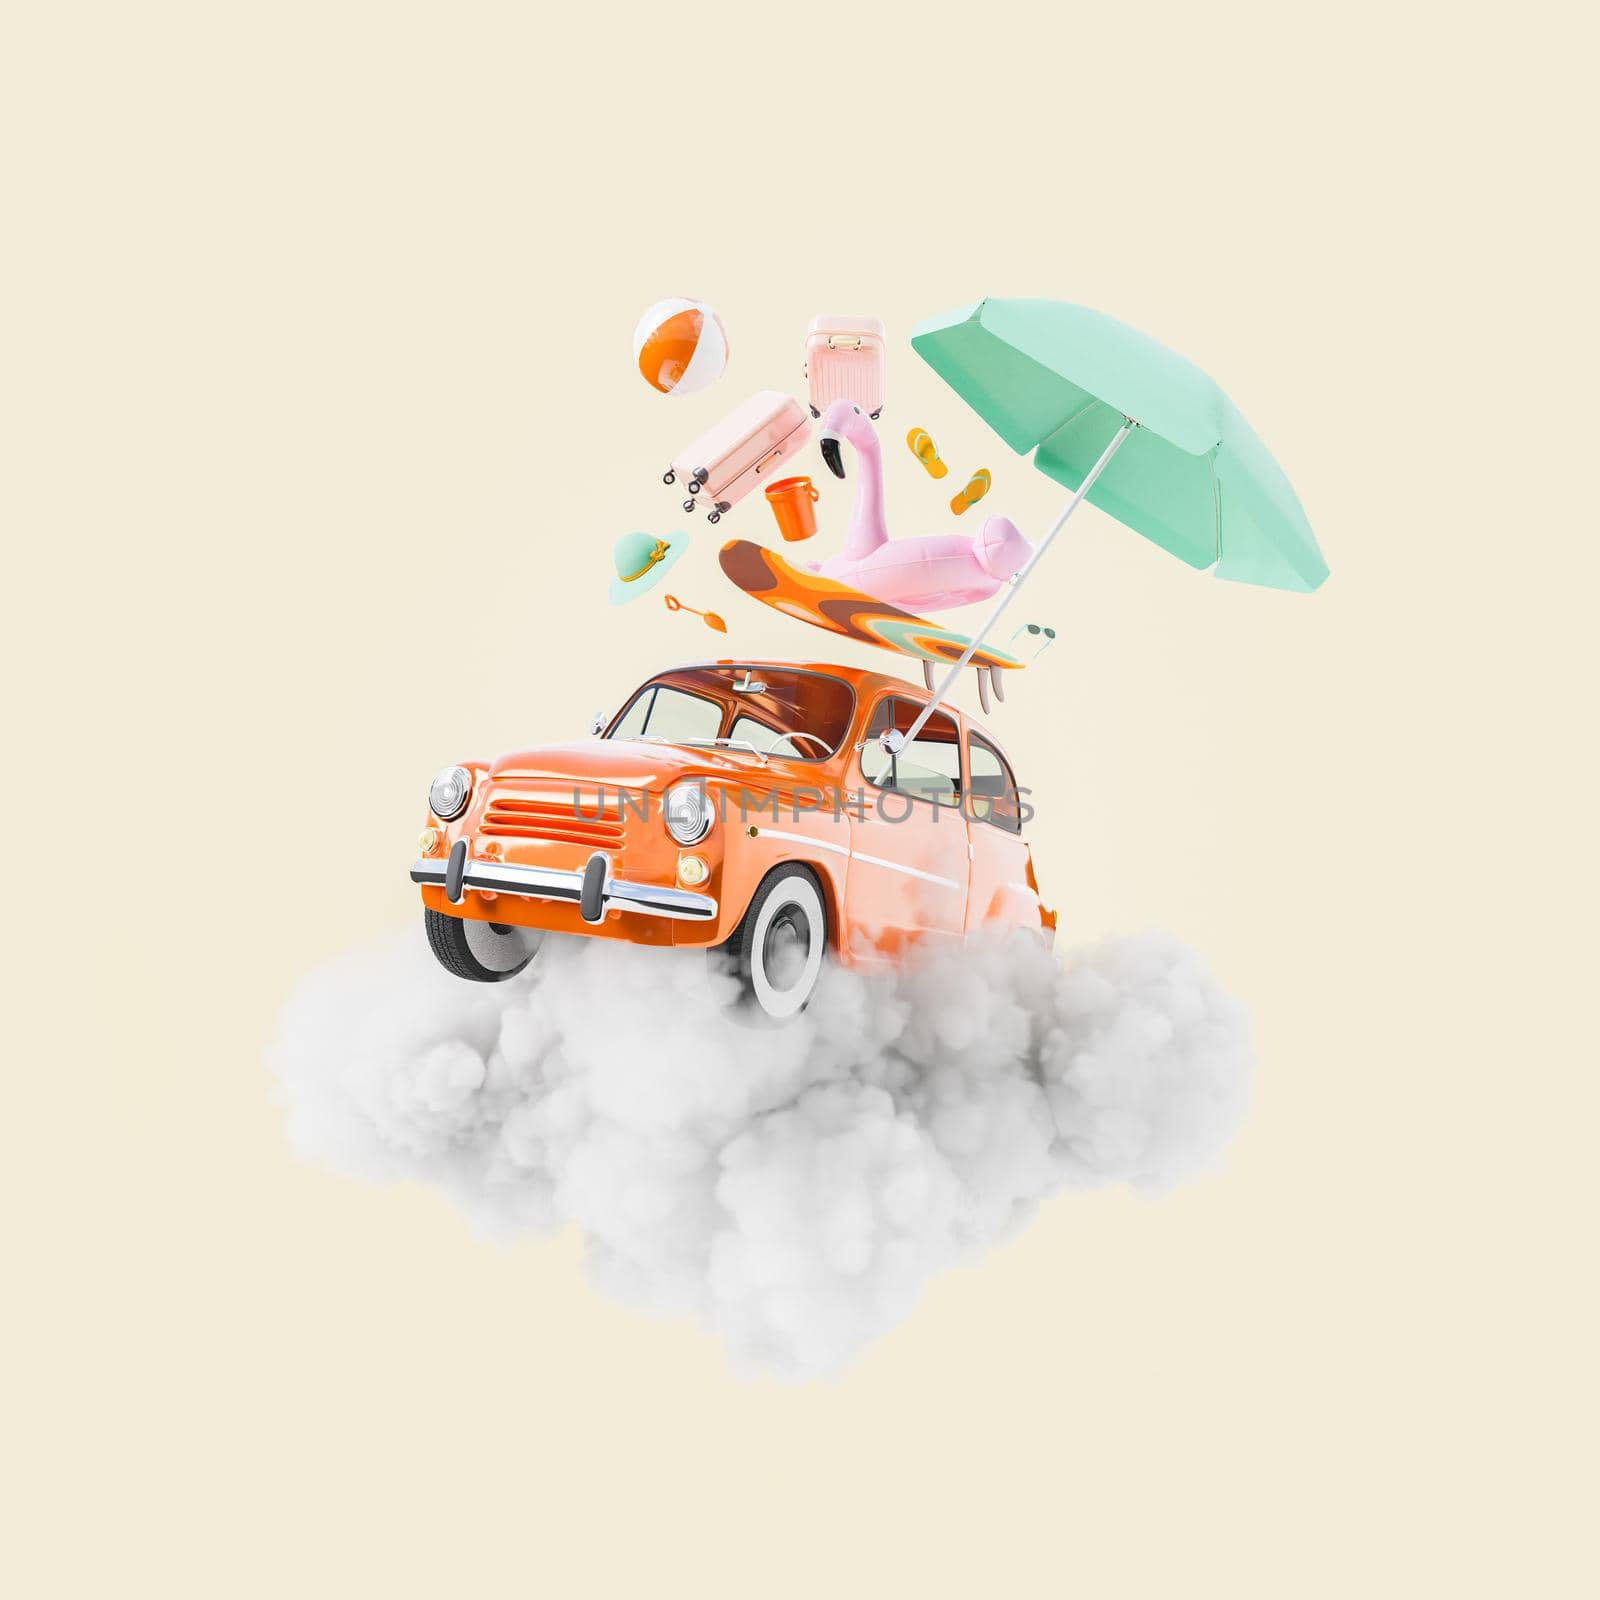 Retro car with beach supplies on cloud by asolano